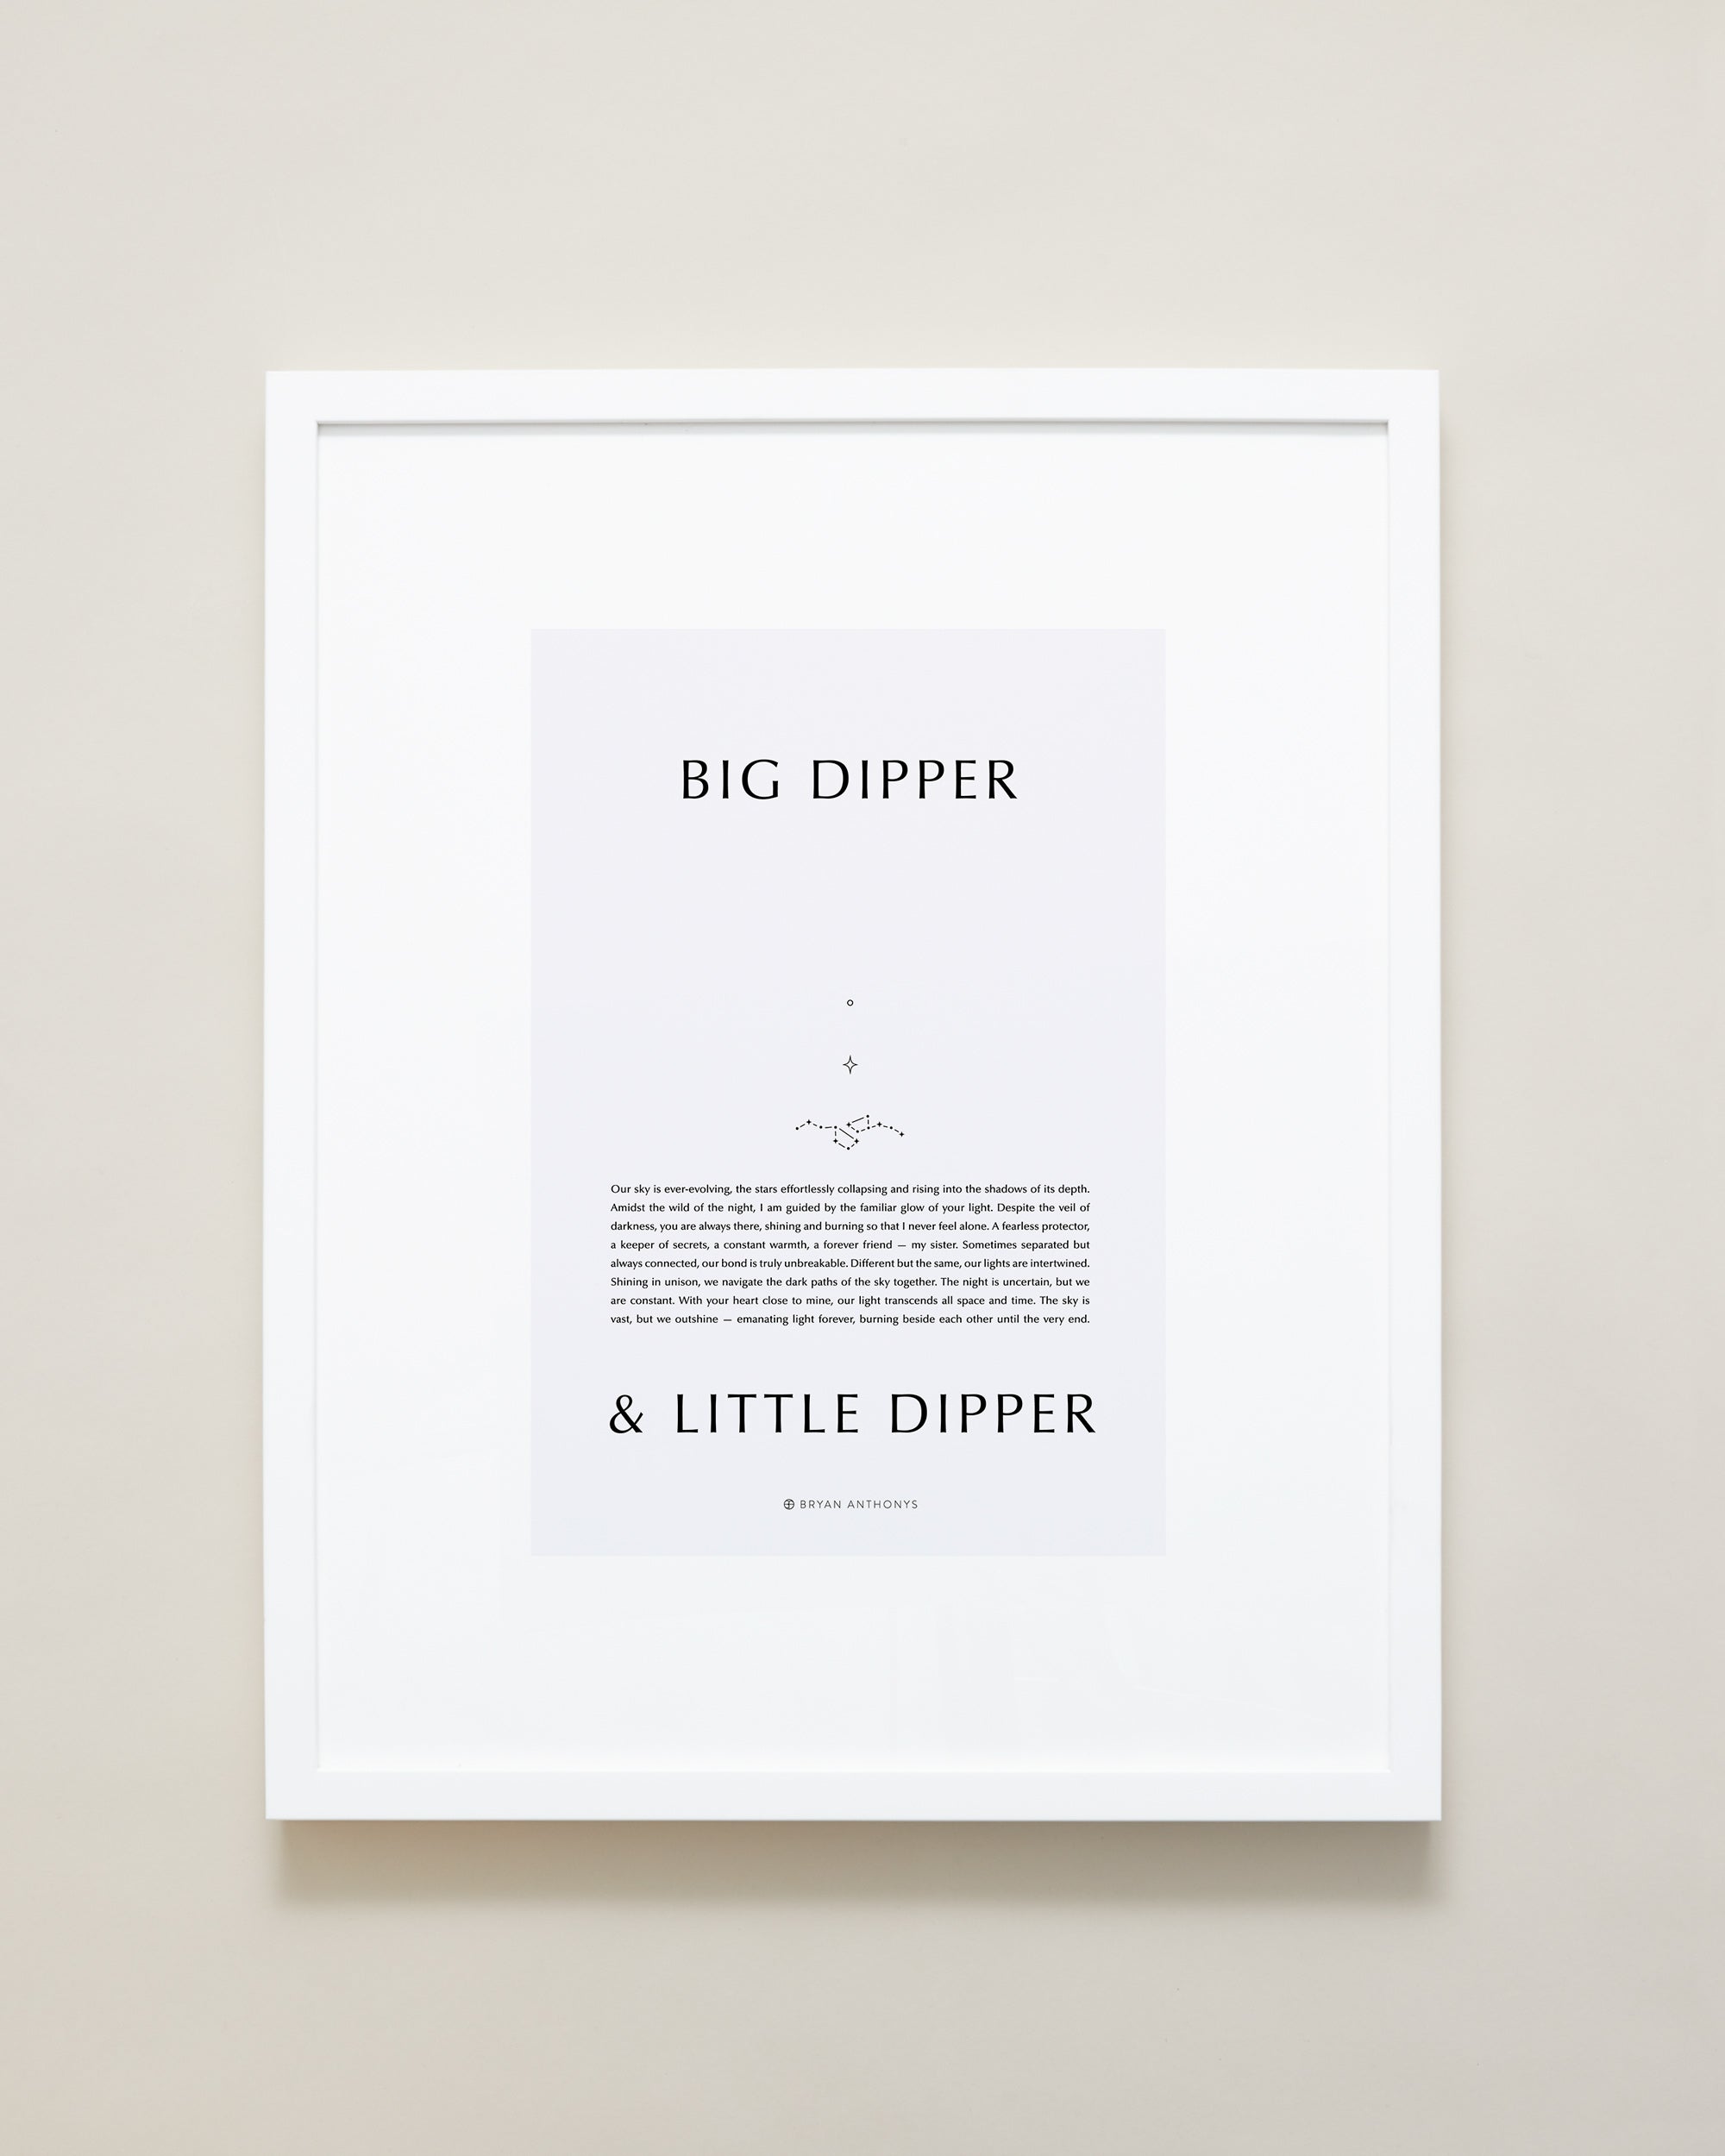 Bryan Anthonys Home Decor Purposeful Prints Big Dipper & Little Dipper Iconic Framed Print Gray Art With White Frame 16x20